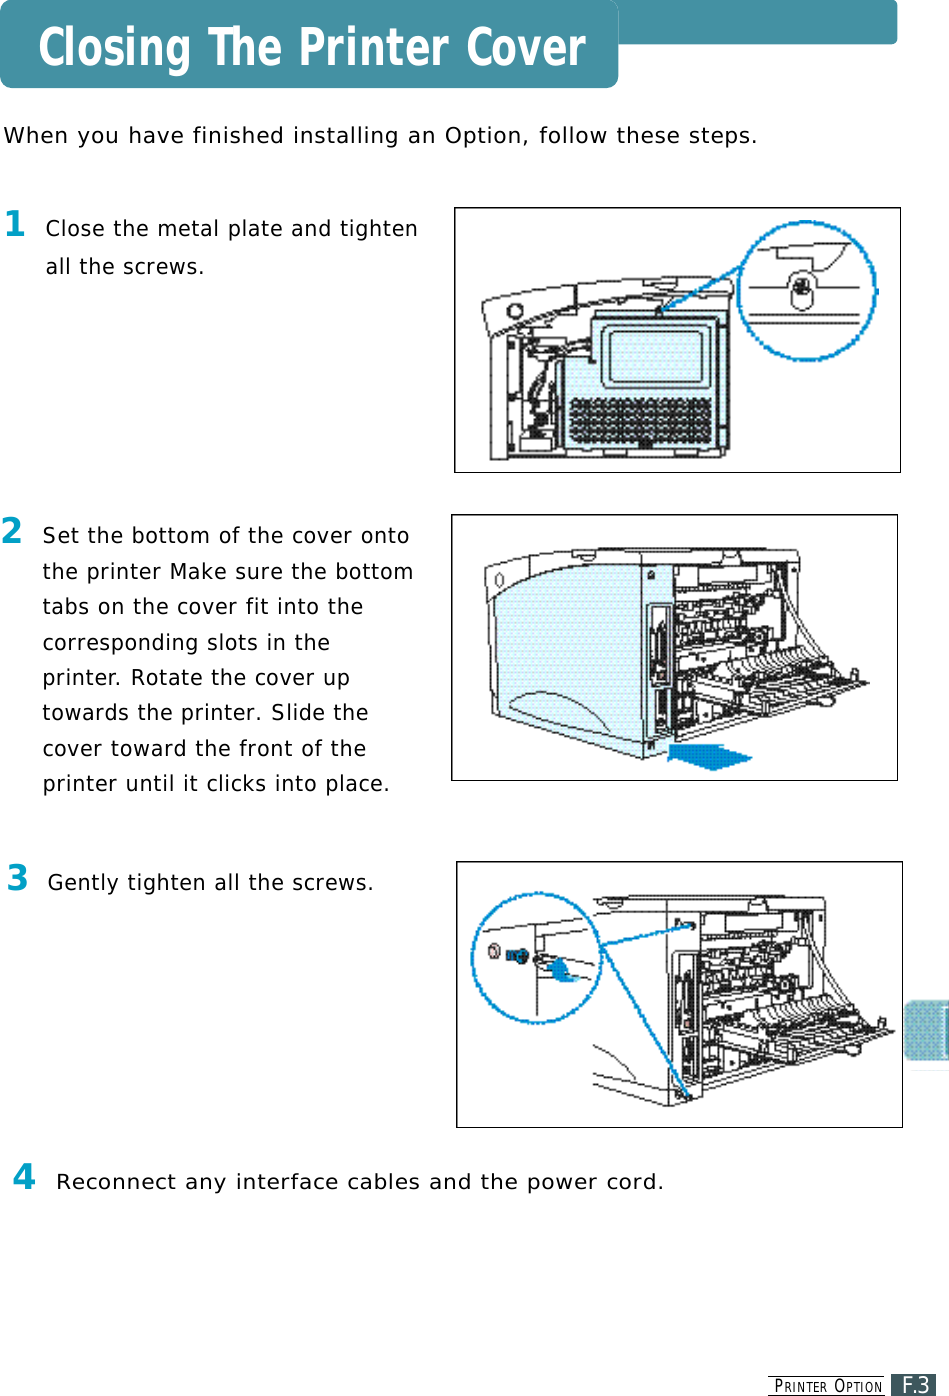 PR I N T E R OP T I O NF.3Closing The Printer CoverWhen you have finished installing an Option, follow these steps.1Close the metal plate and tightenall the screws.2Set the bottom of the cover ontothe printer Make sure the bottomtabs on the cover fit into thecorresponding slots in thep r i n t e r. Rotate the cover upt o wards the printer. Slide thec over toward the front of theprinter until it clicks into place.3Gently tighten all the screws.4Reconnect any interface cables and the power cord. 